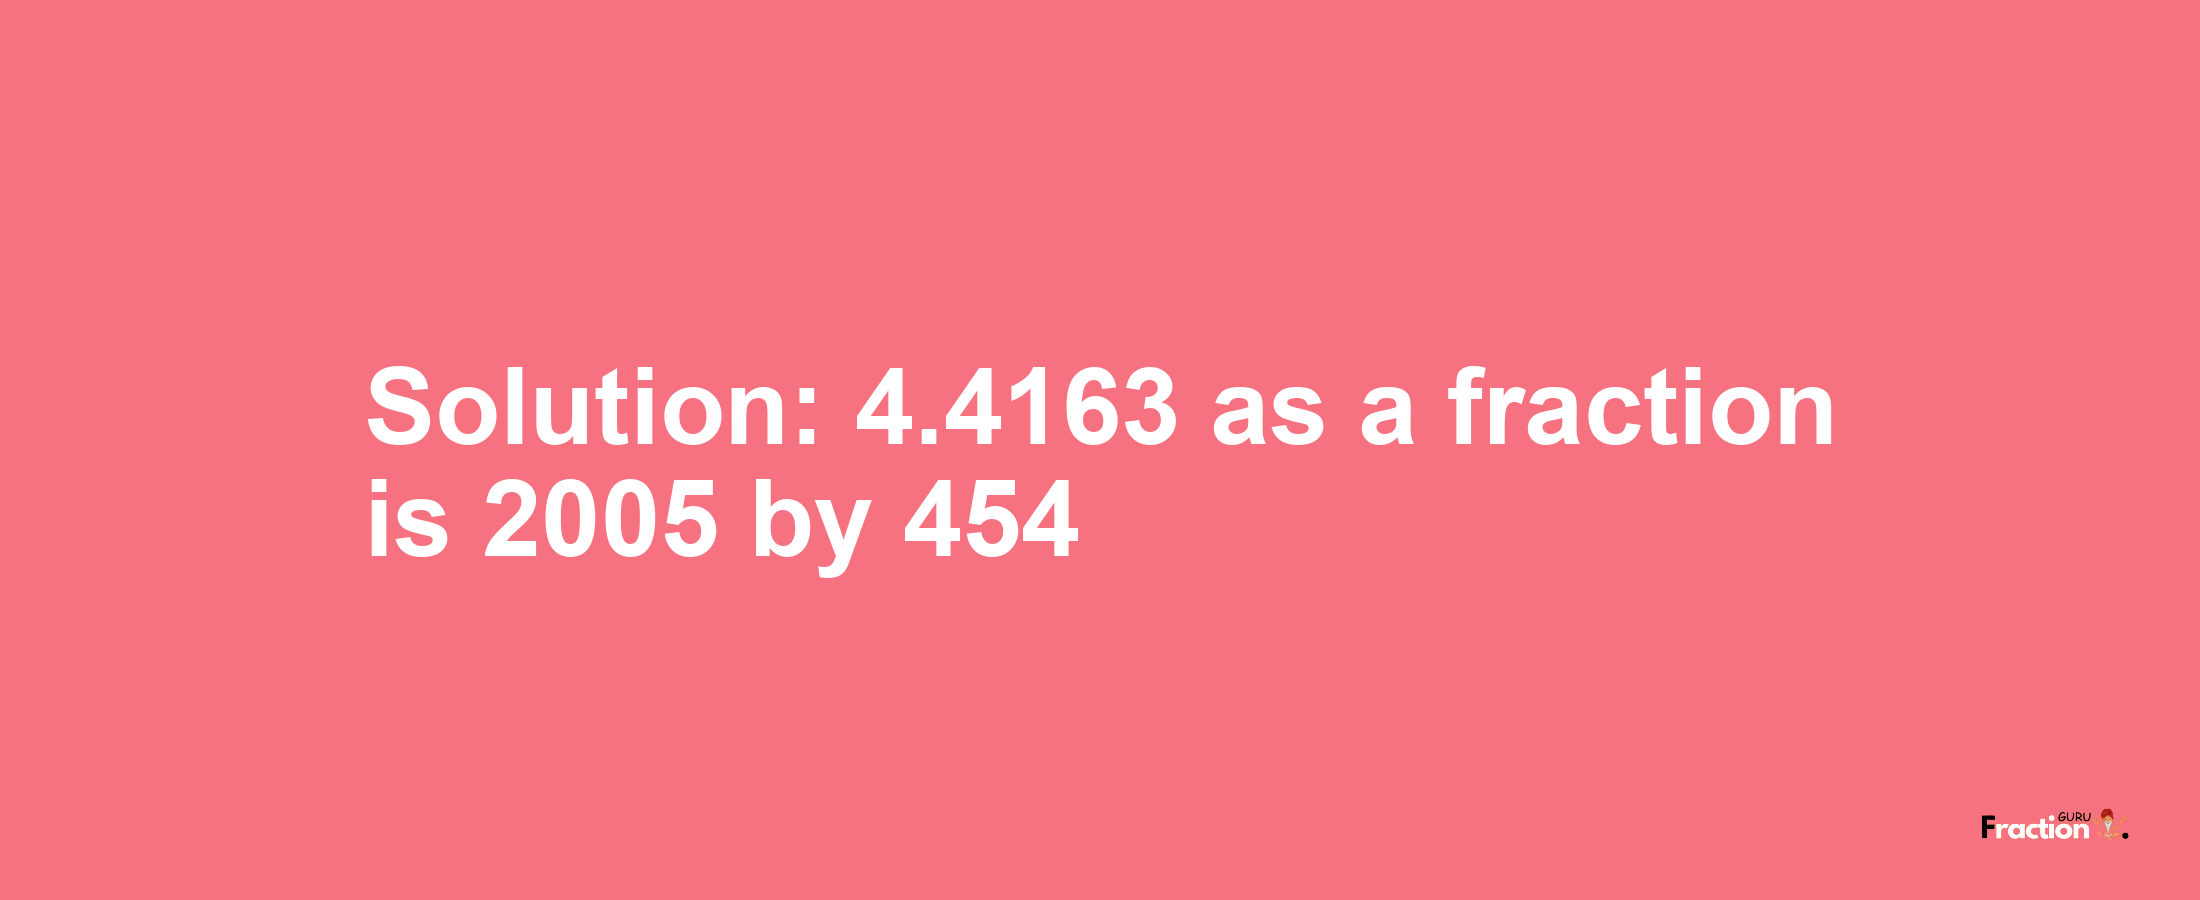 Solution:4.4163 as a fraction is 2005/454